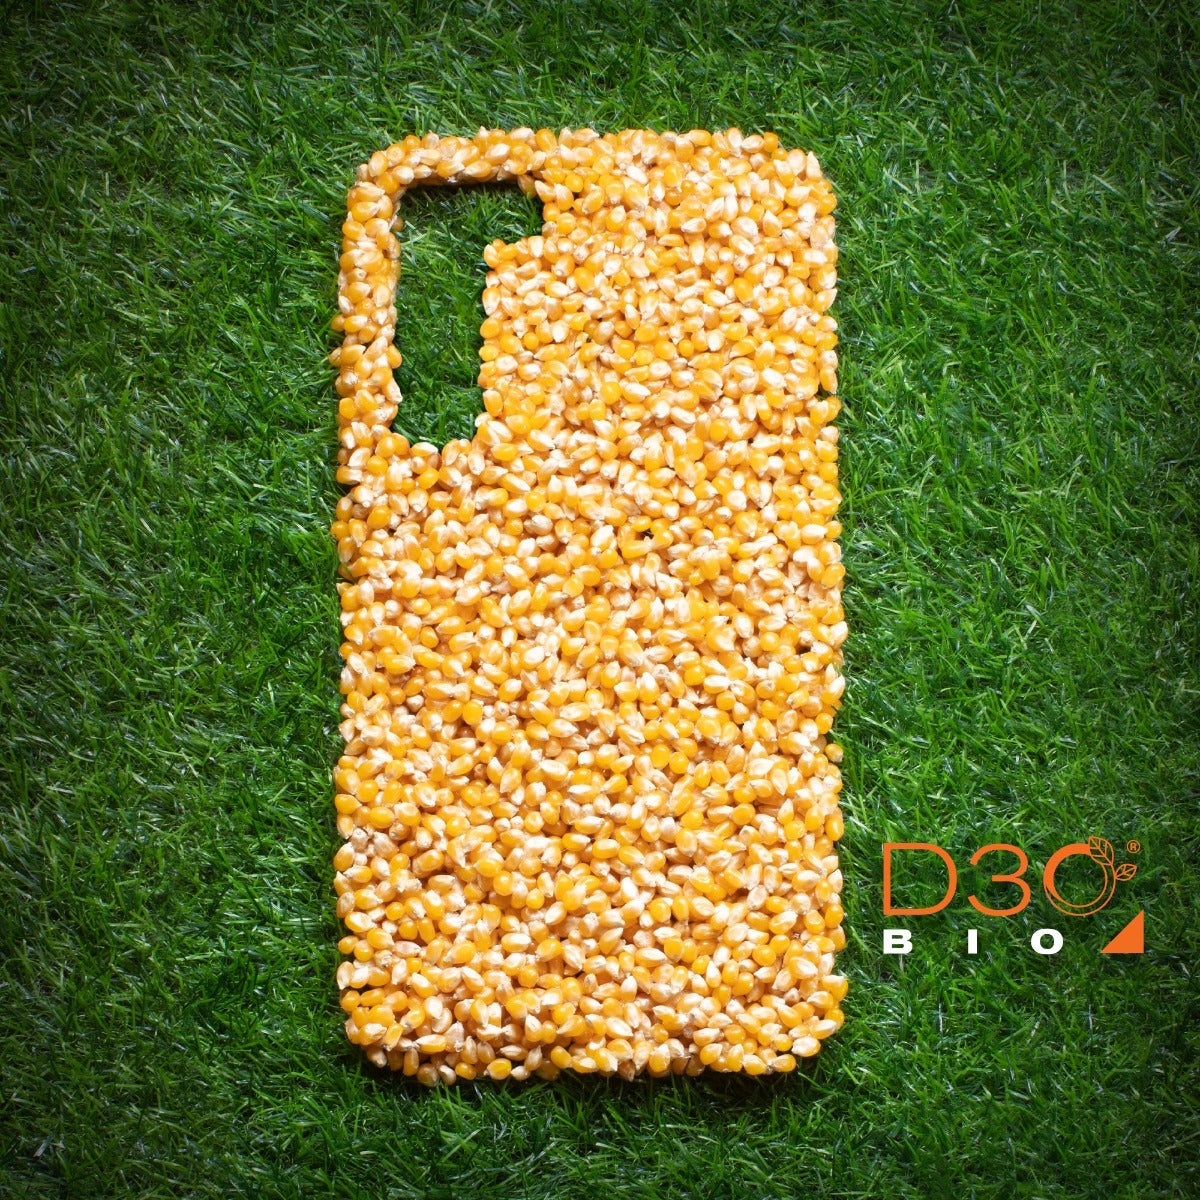 Made with D3O®
||D3O® is a pliable, flexible material that hardens on impact, dissipating shock and protecting your device.